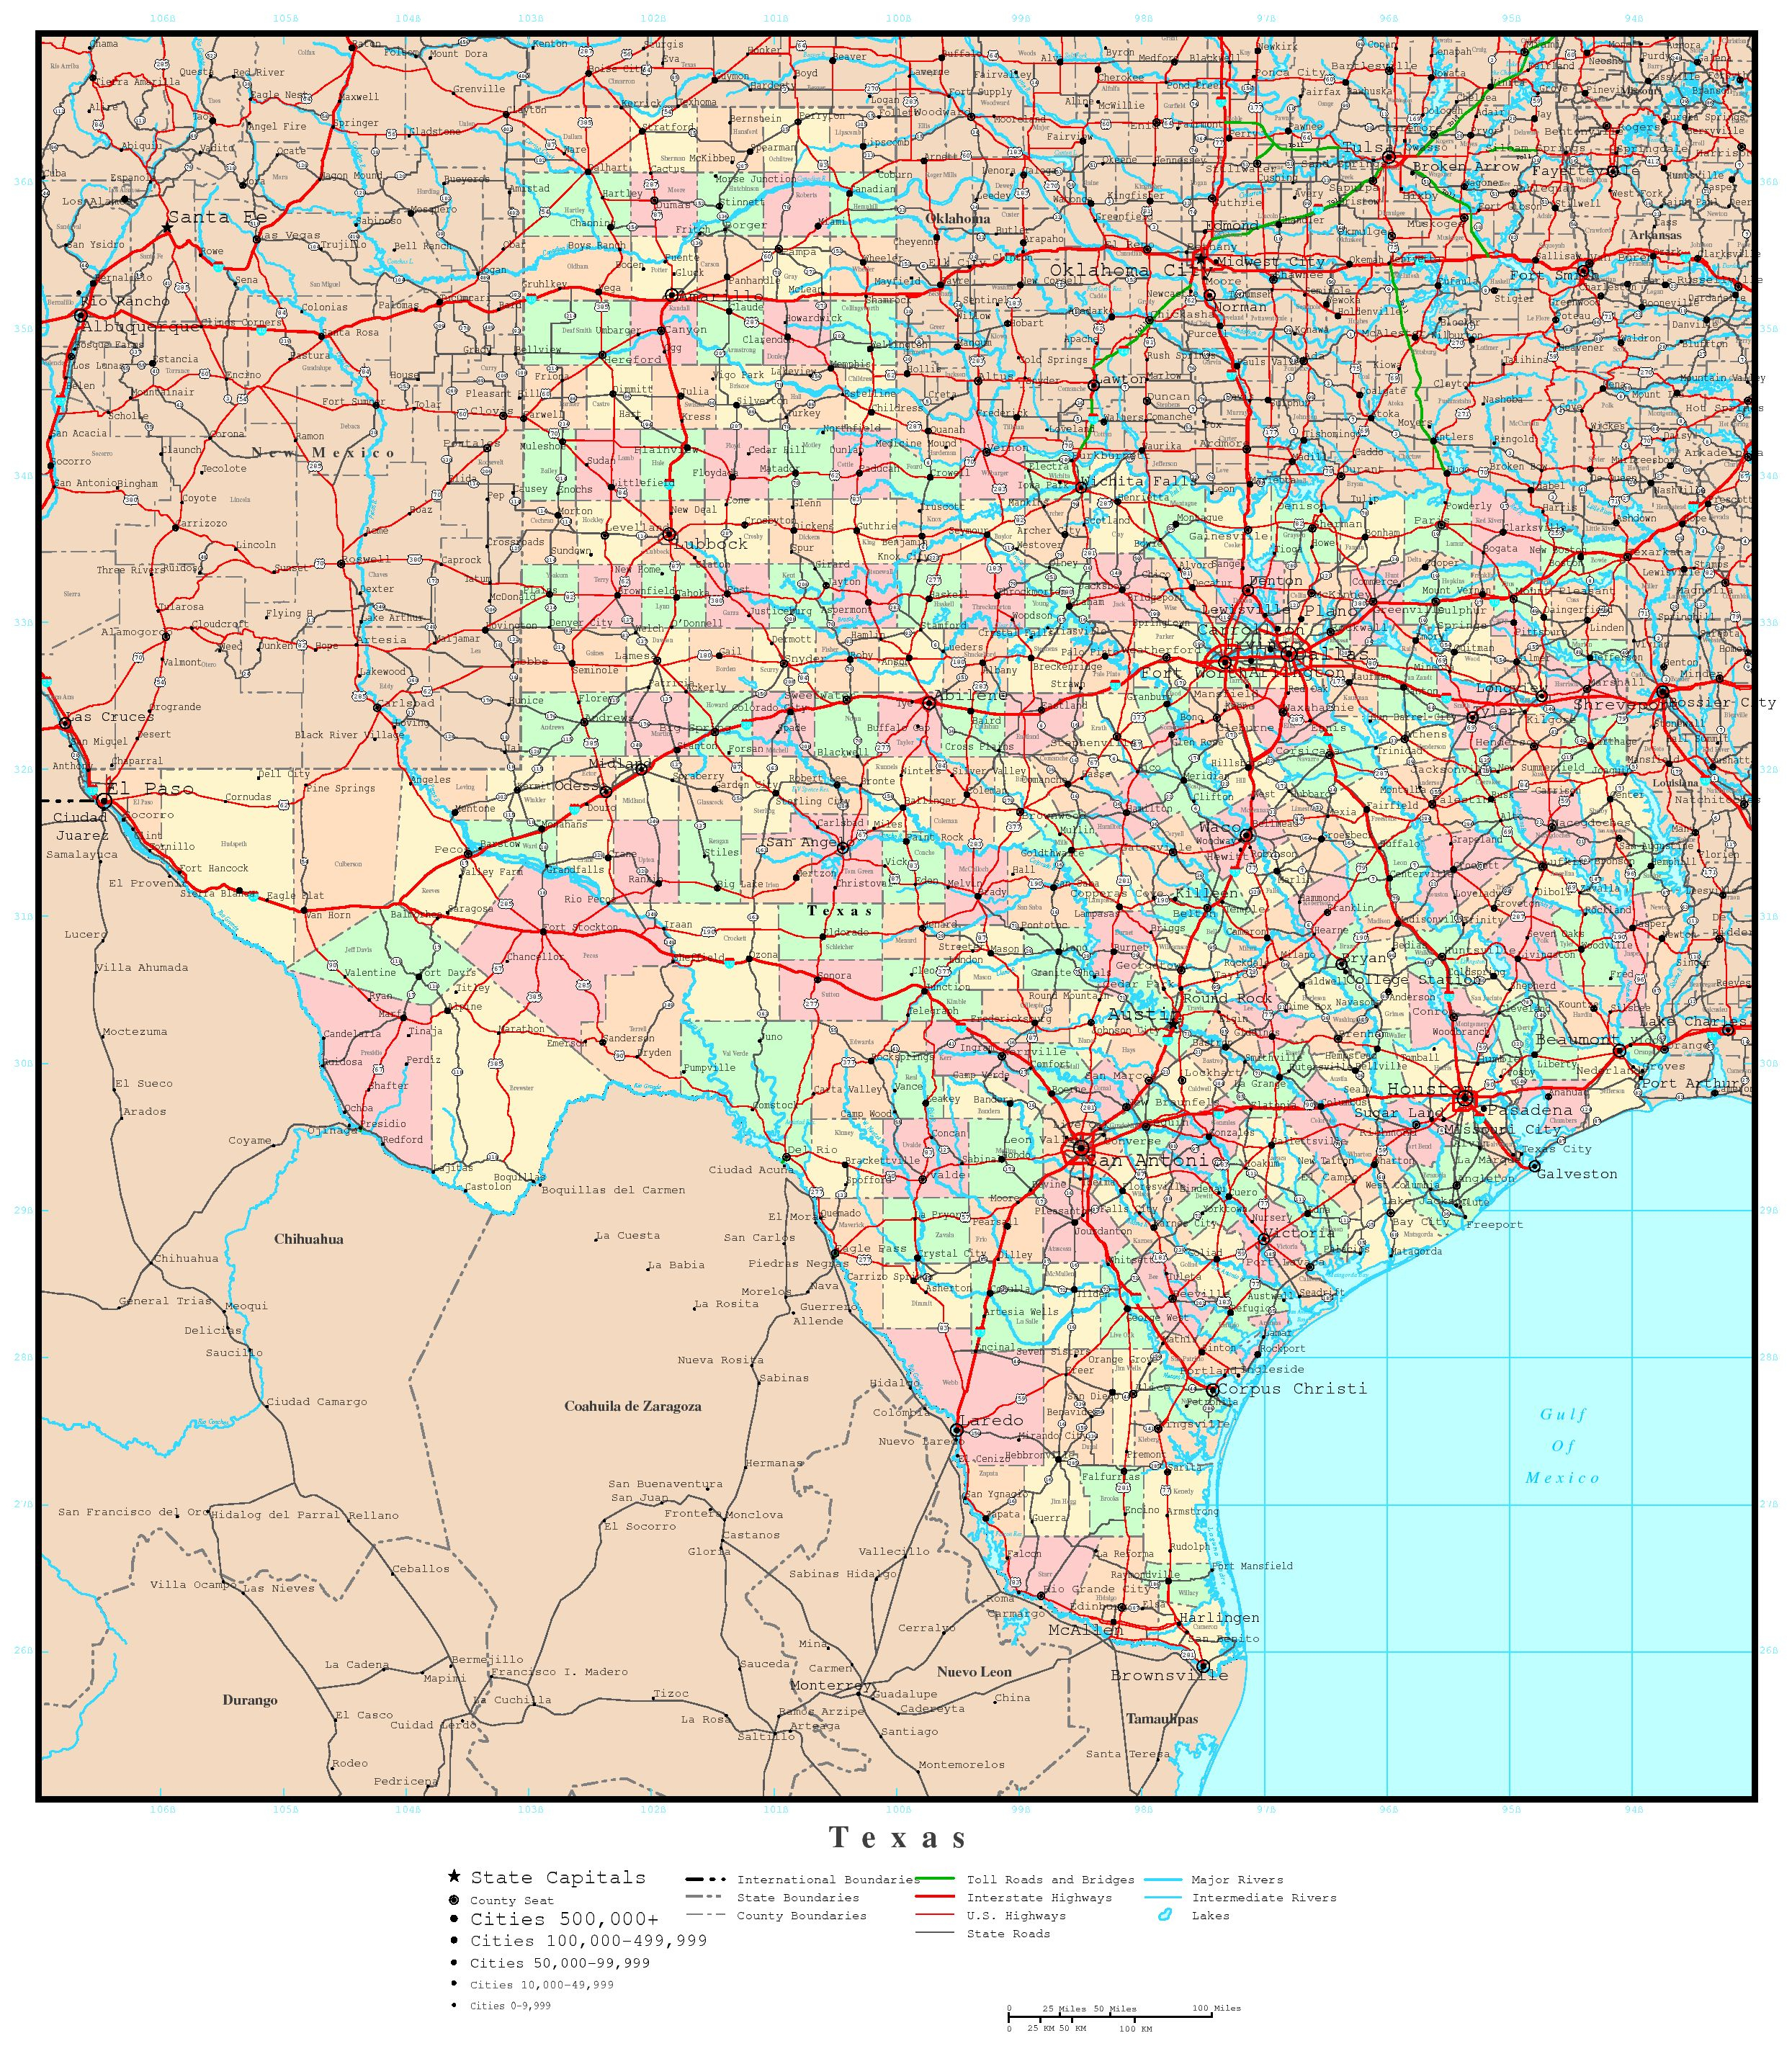 Texas Maps County And Travel Information | Download Free Texas Maps - Texas Map With County Lines